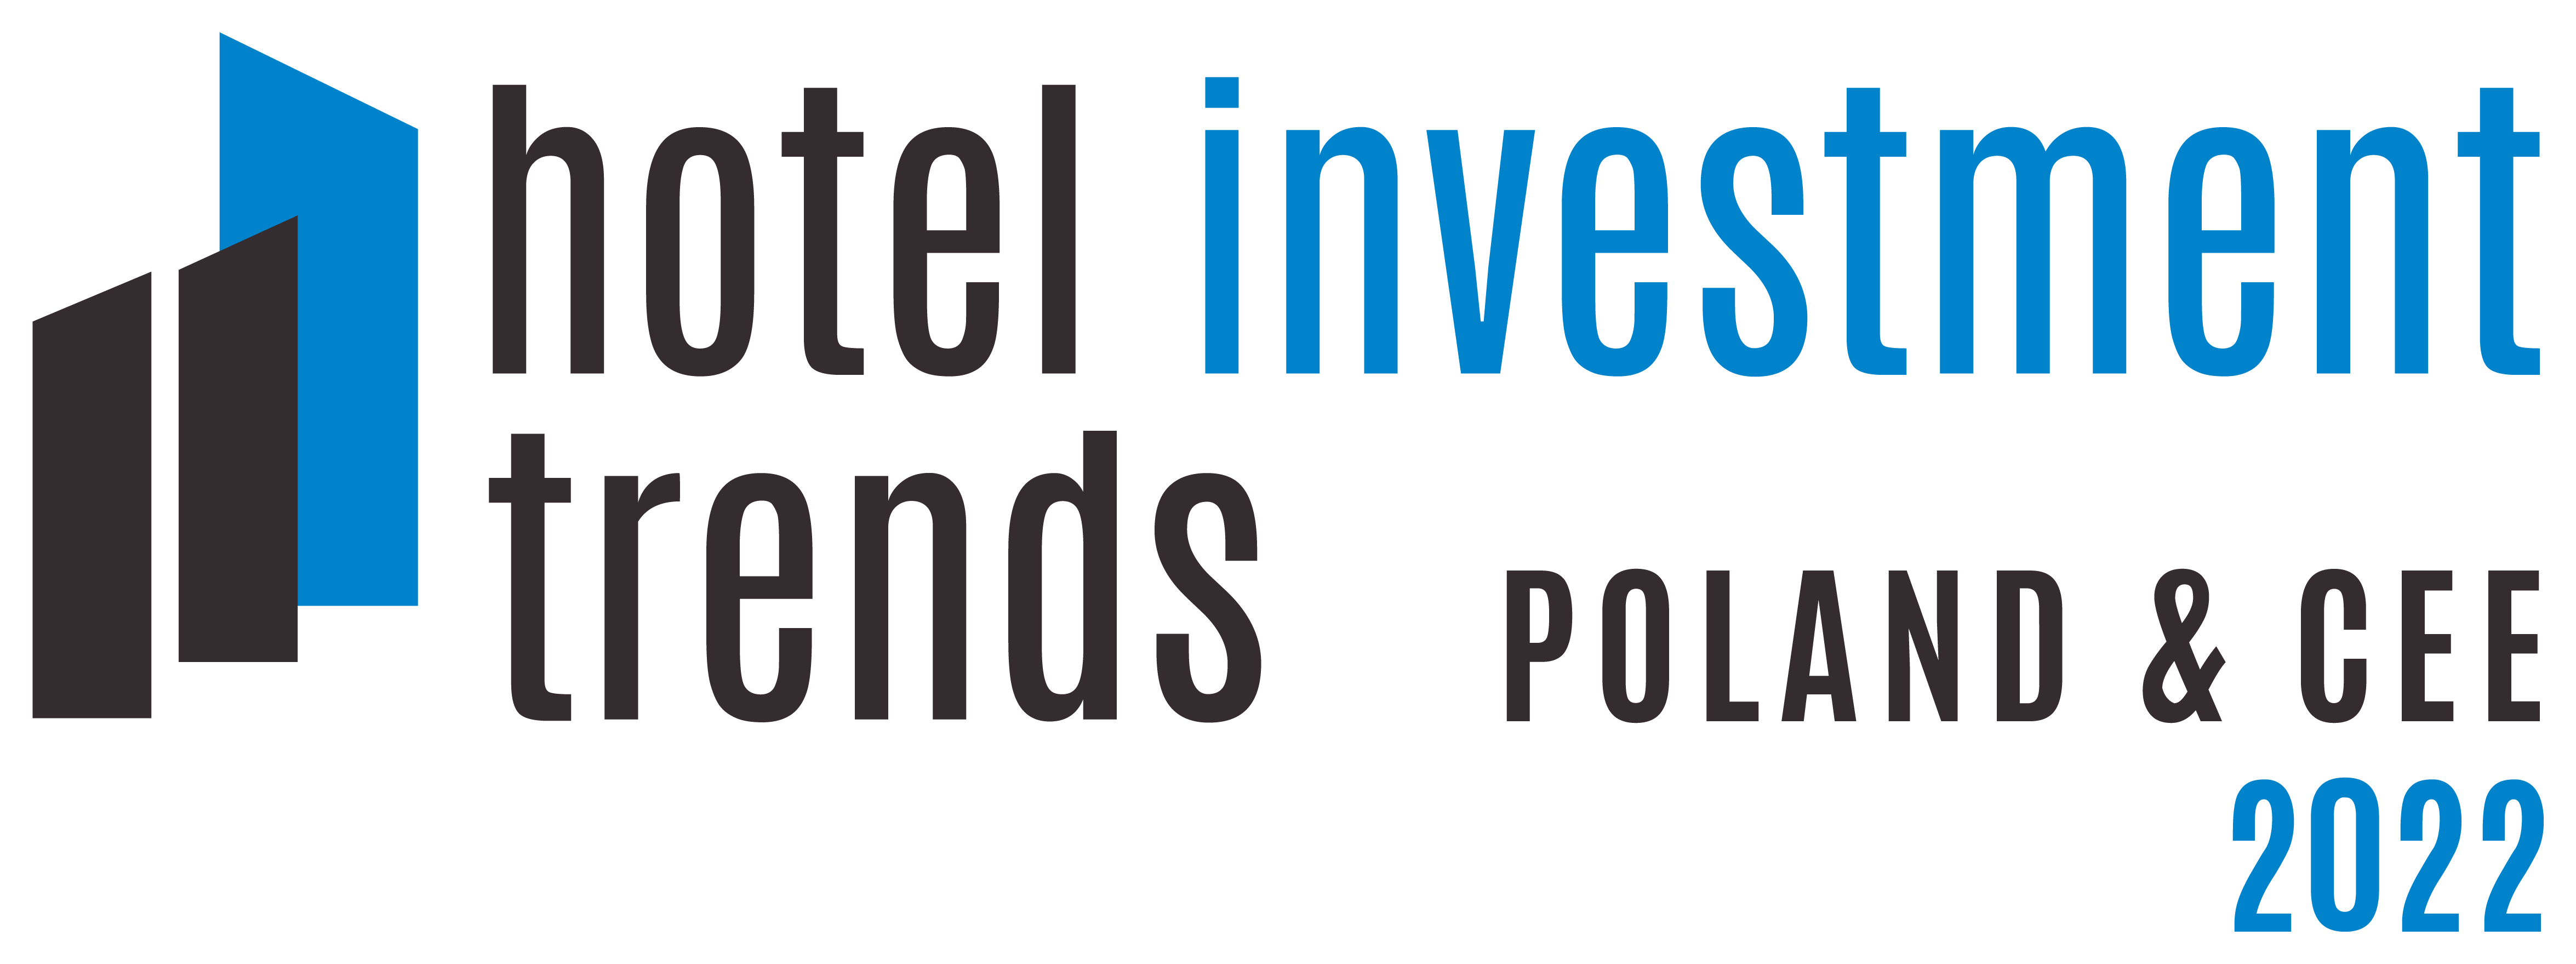 Hotel Investment Trends 2022 Logo